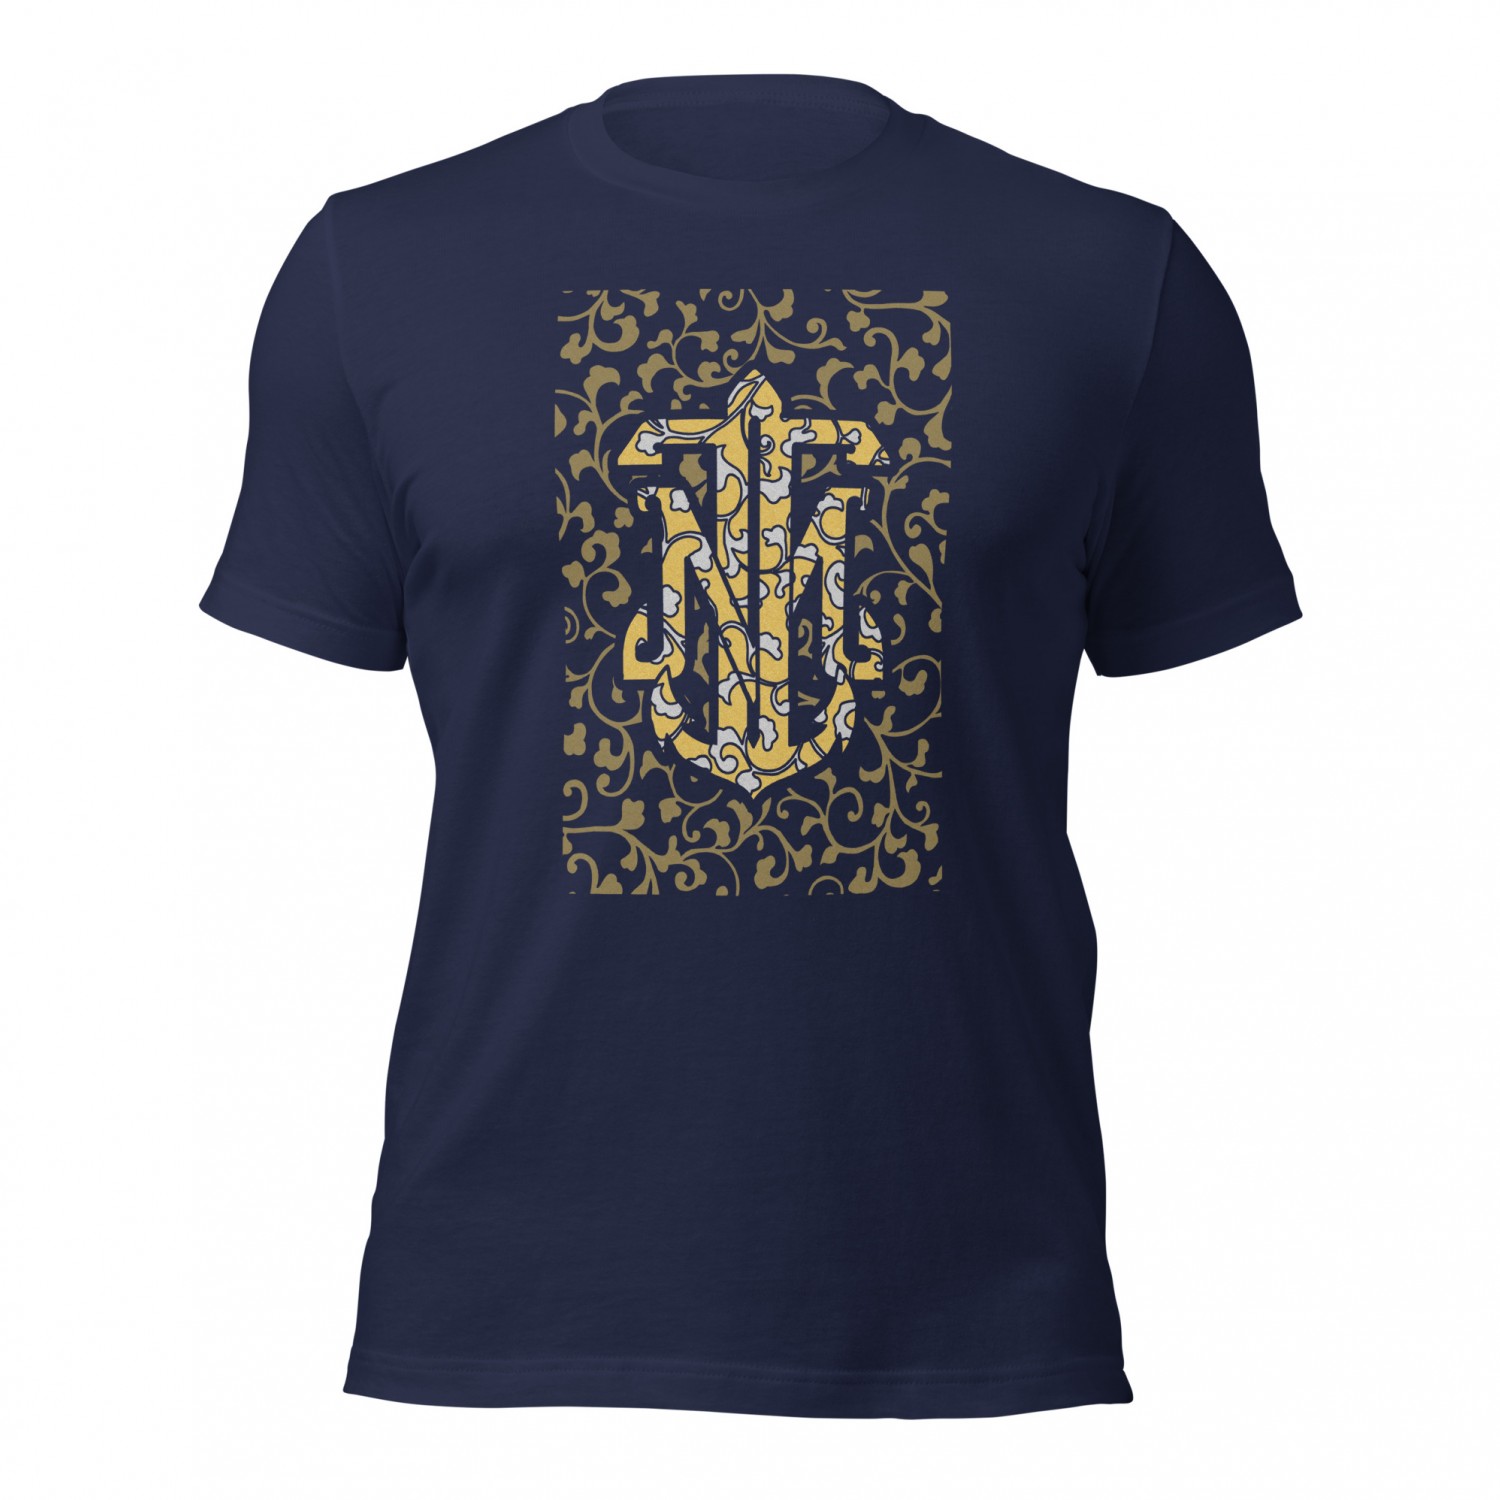 Buy a Veles World T-shirt with an anchor